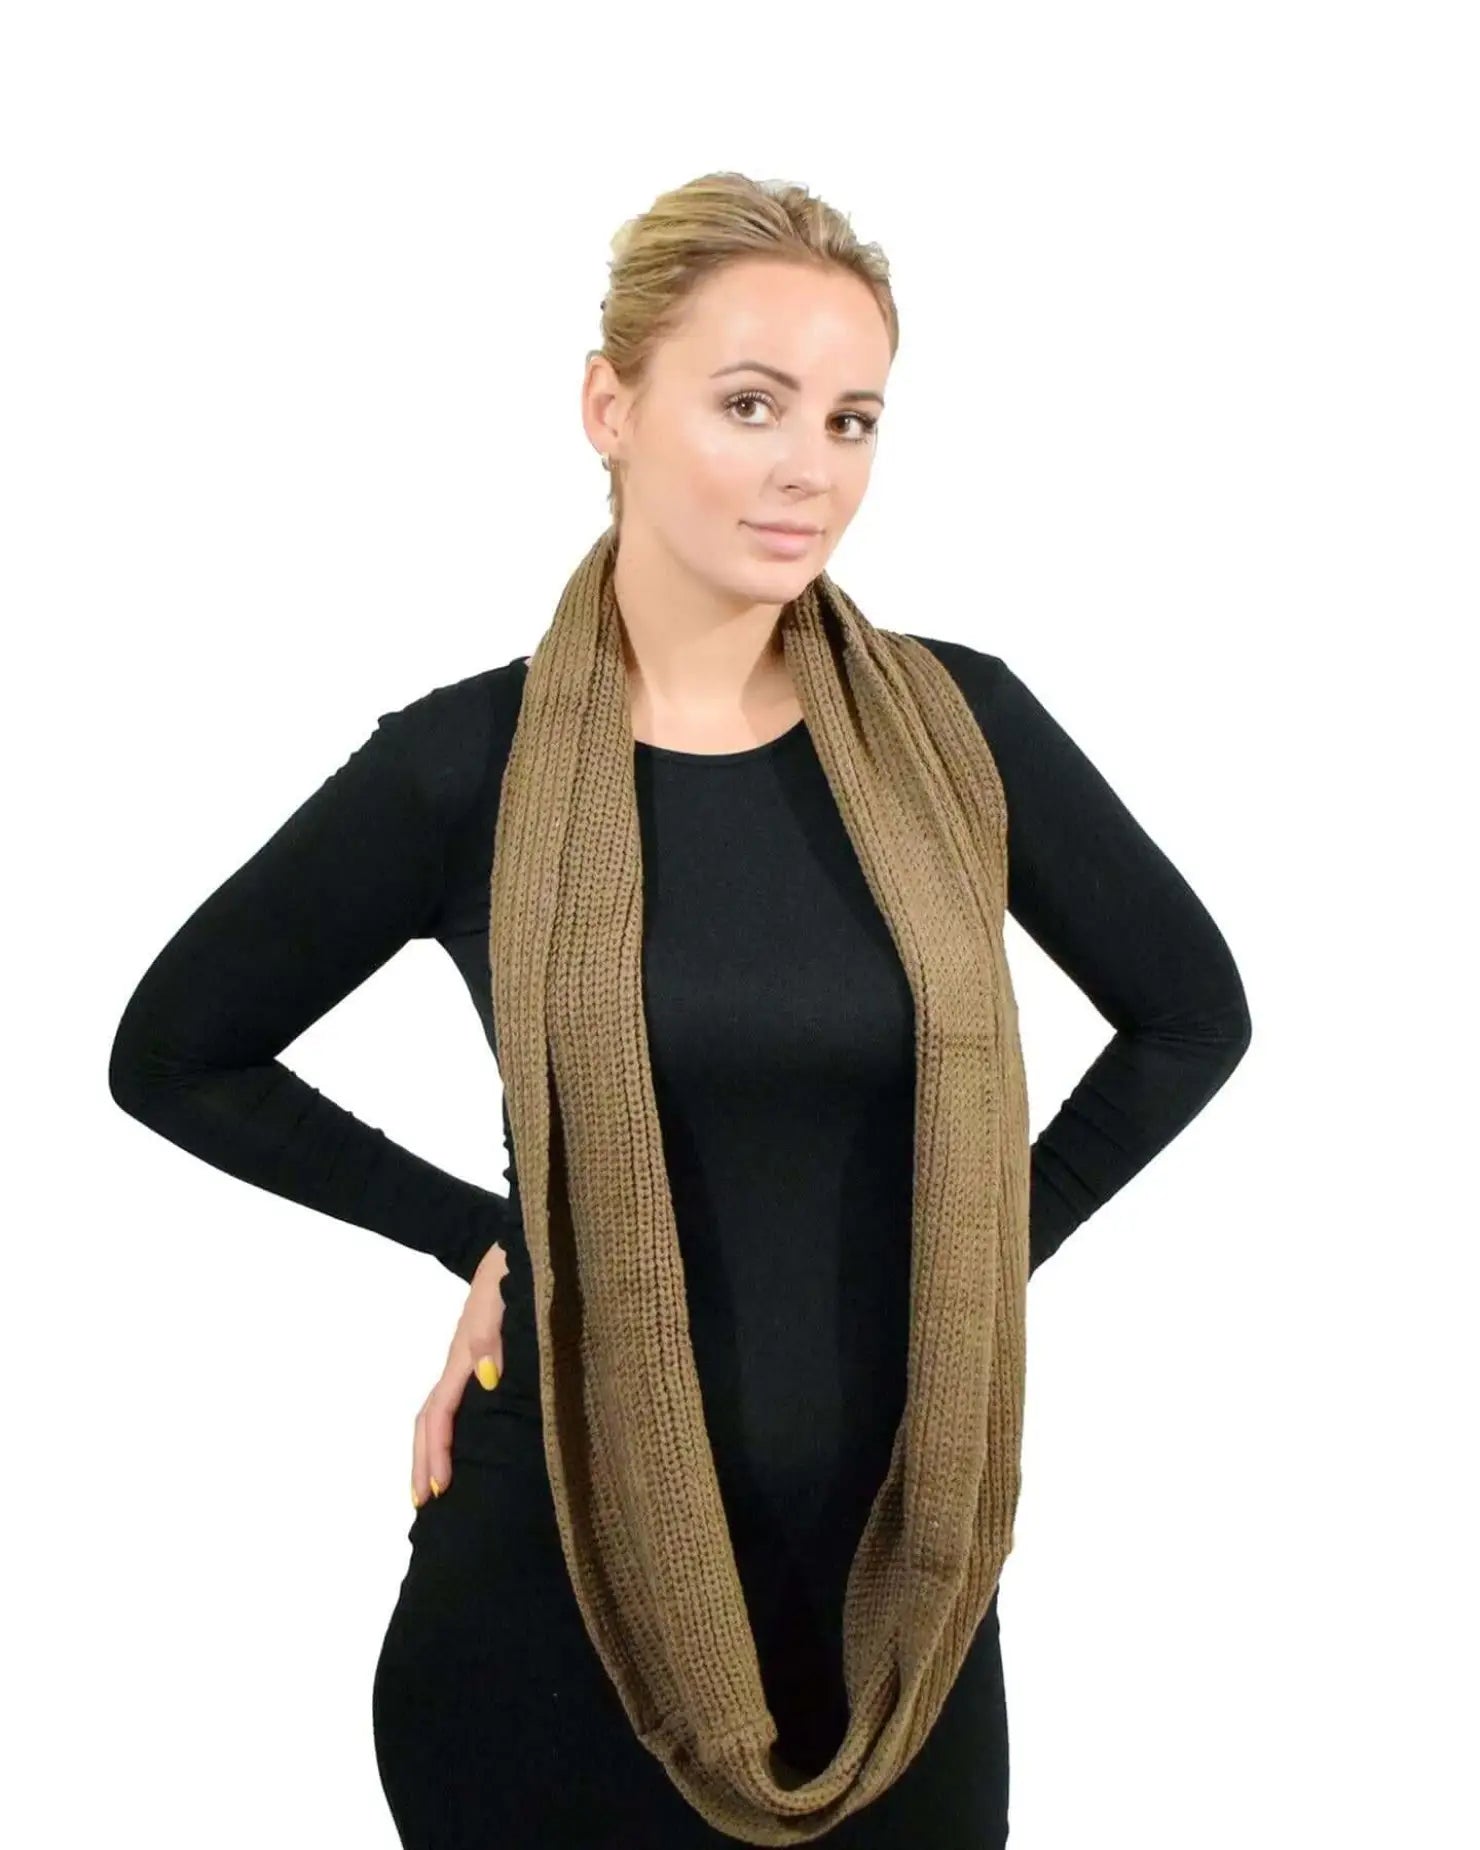 Woman wearing a warm plain knitted snood